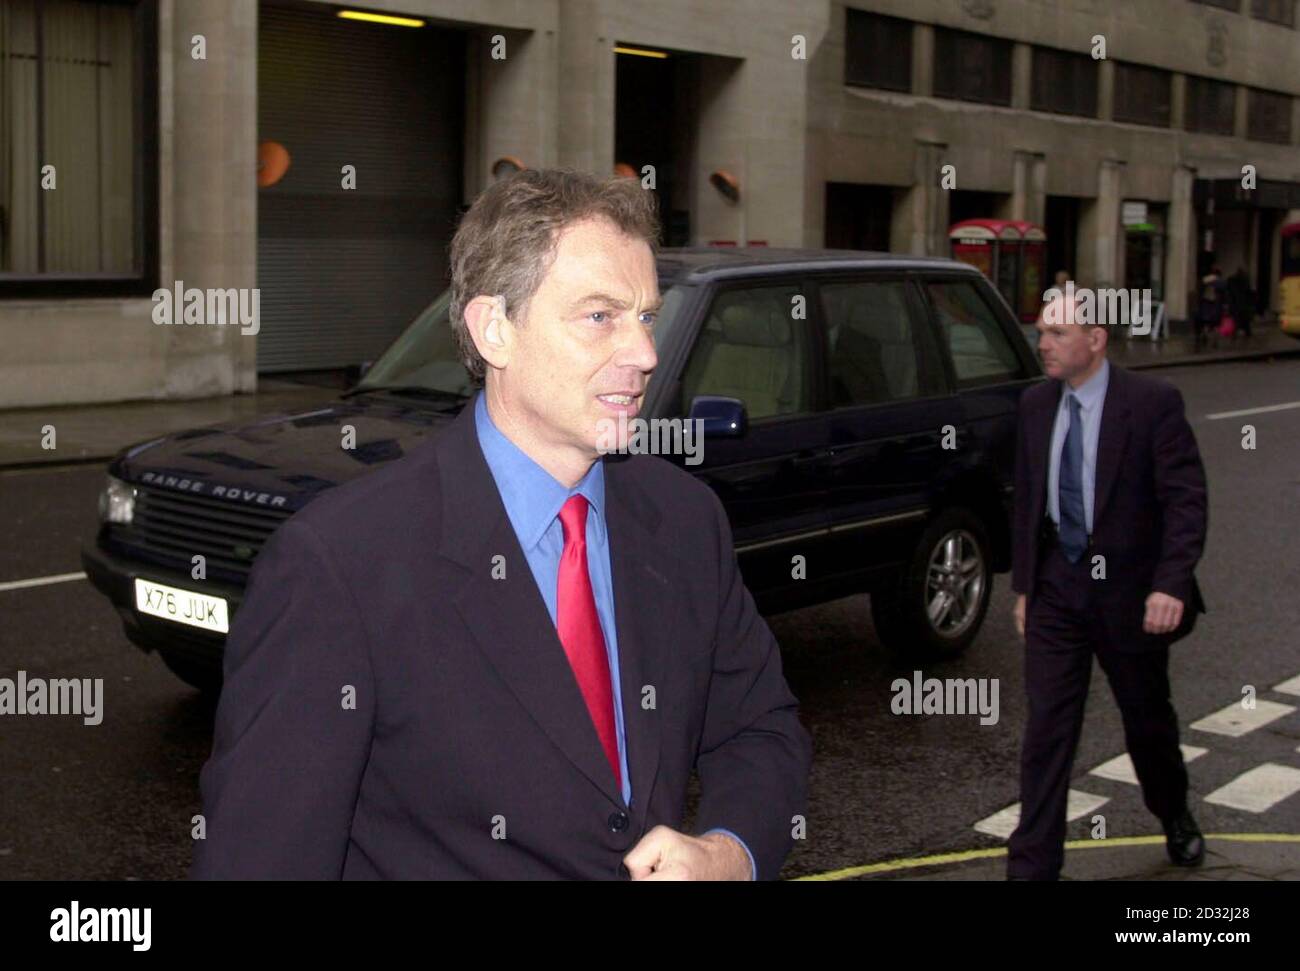 Prime Minister Tony Blair arriving at Methodist Central Hall in London for a memorial meeting for Baroness Barbara Castle of Blackburn. The former Labour Cabinet minister and legendary firebrand died in May at  the age of 91.   Stock Photo